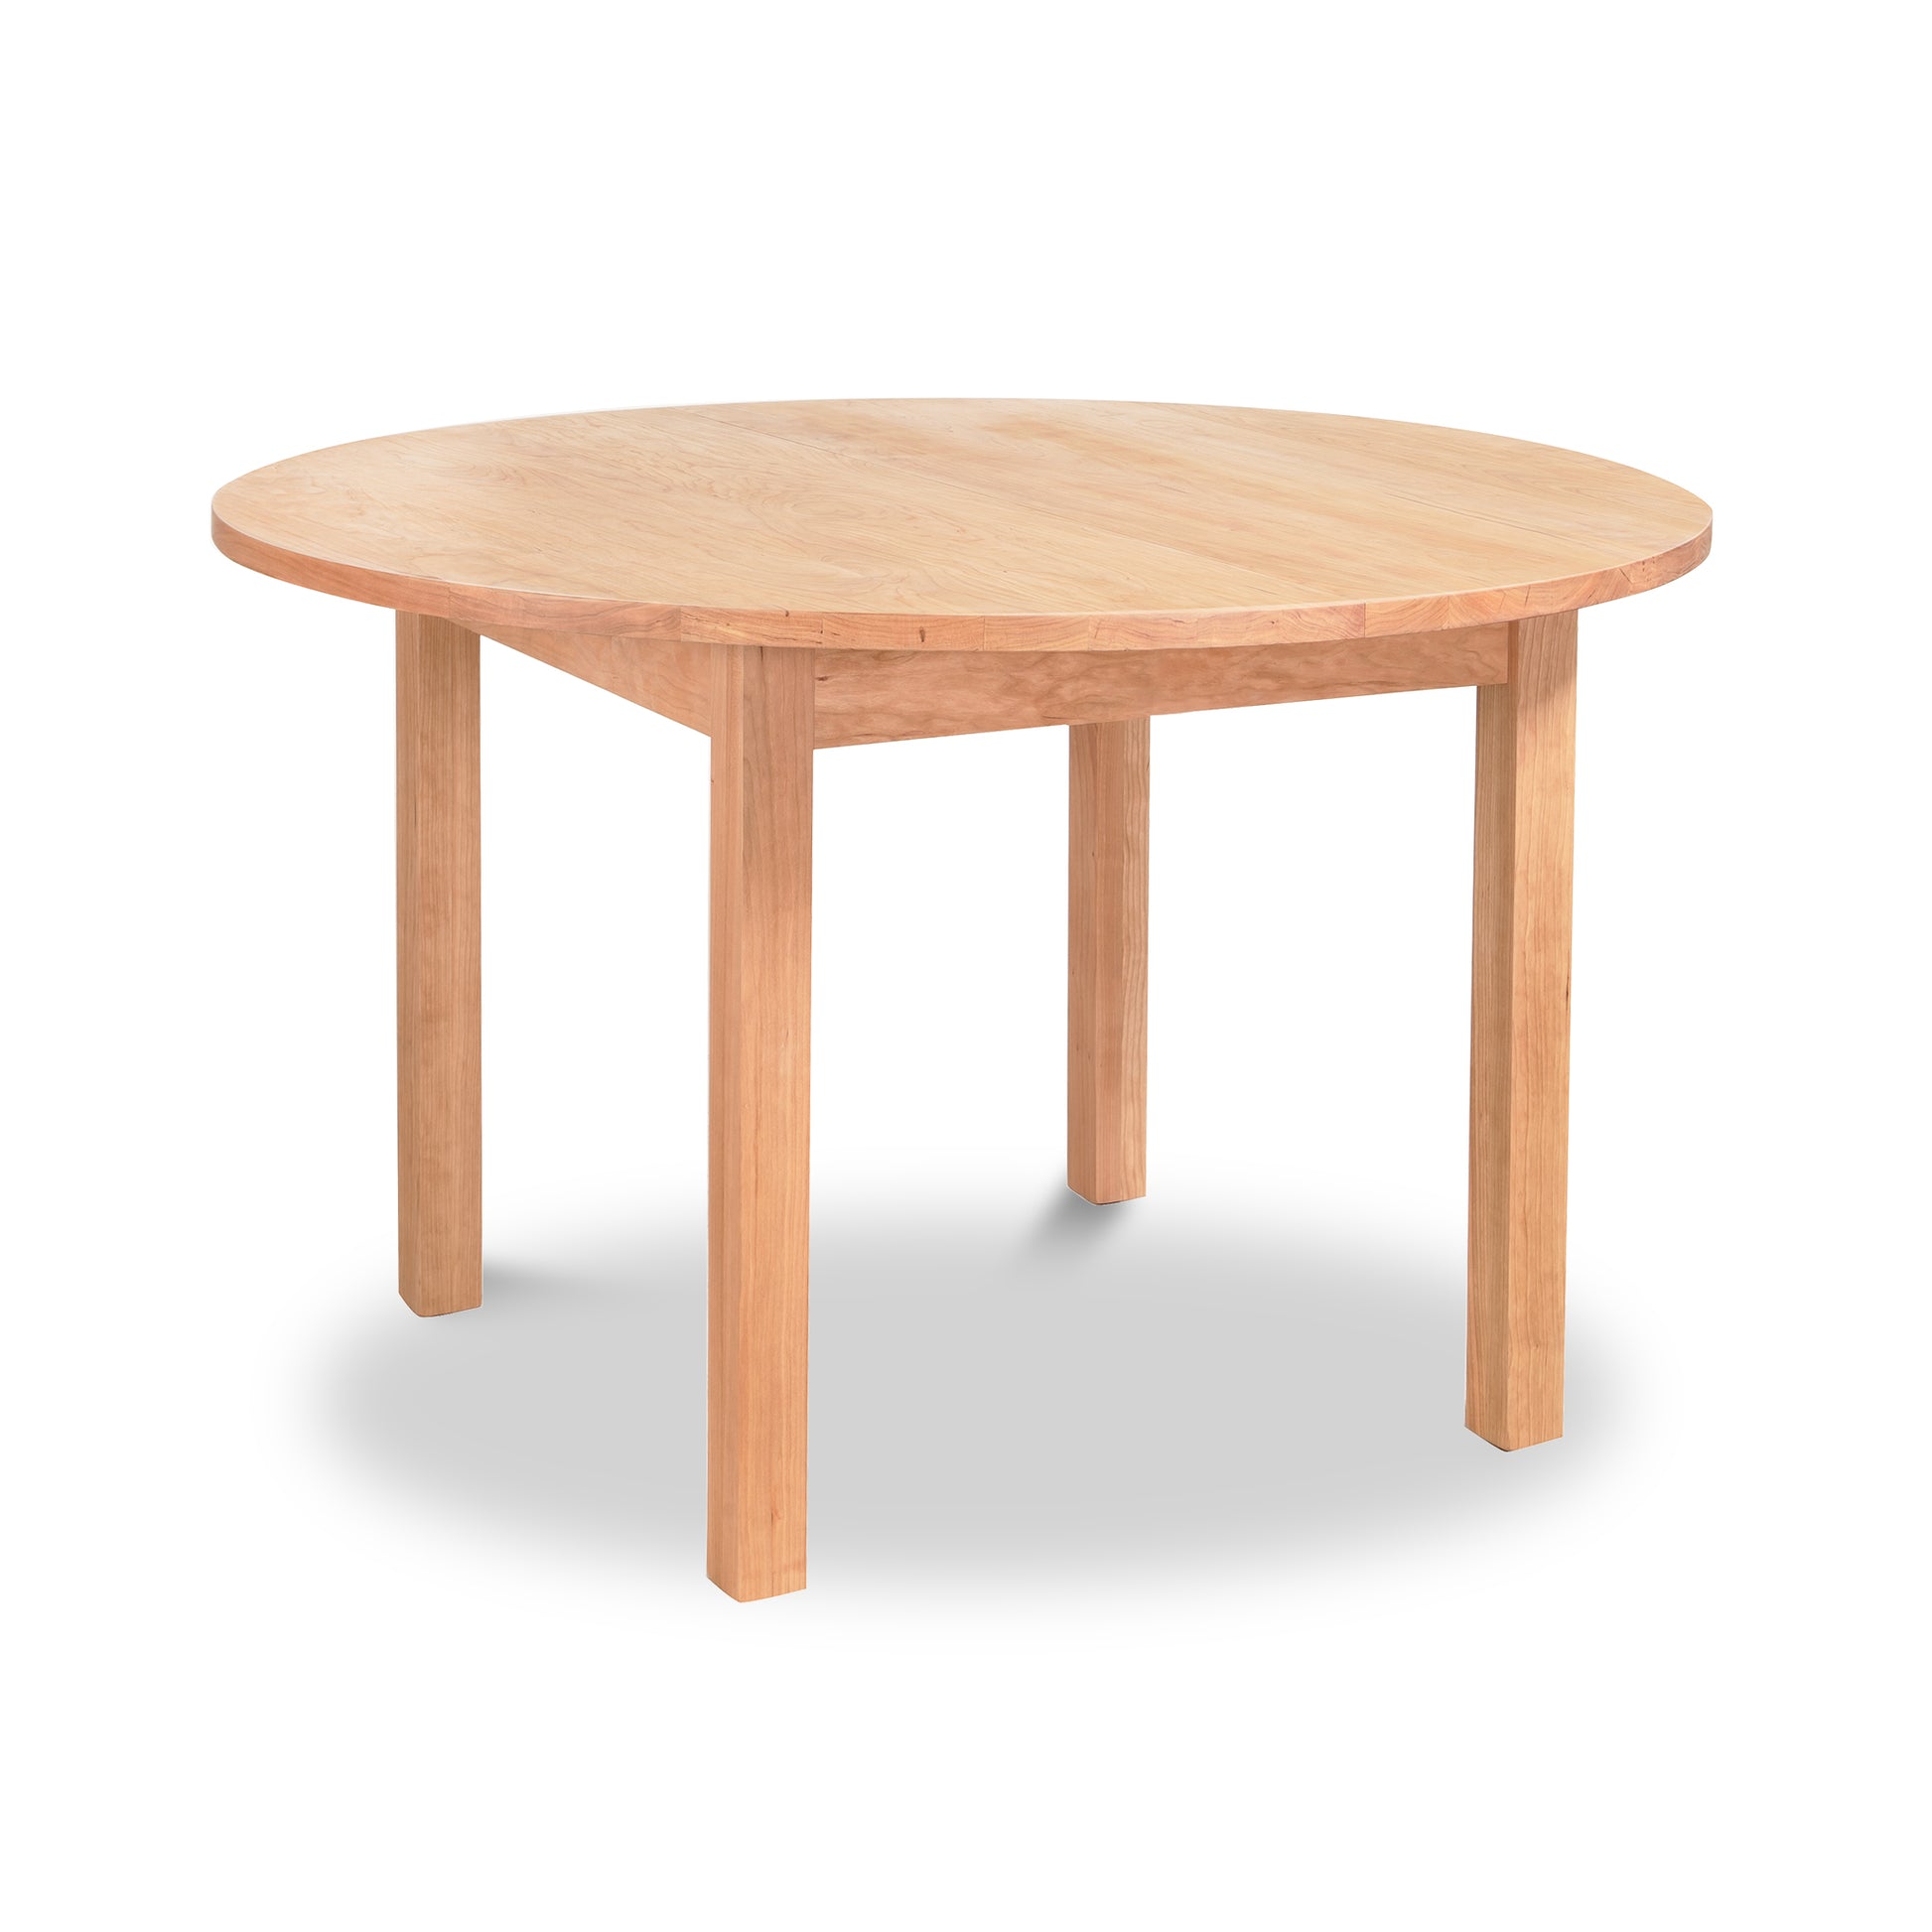 A Burlington Shaker Round Solid Top Dining Table by Vermont Furniture Designs isolated on a white background.